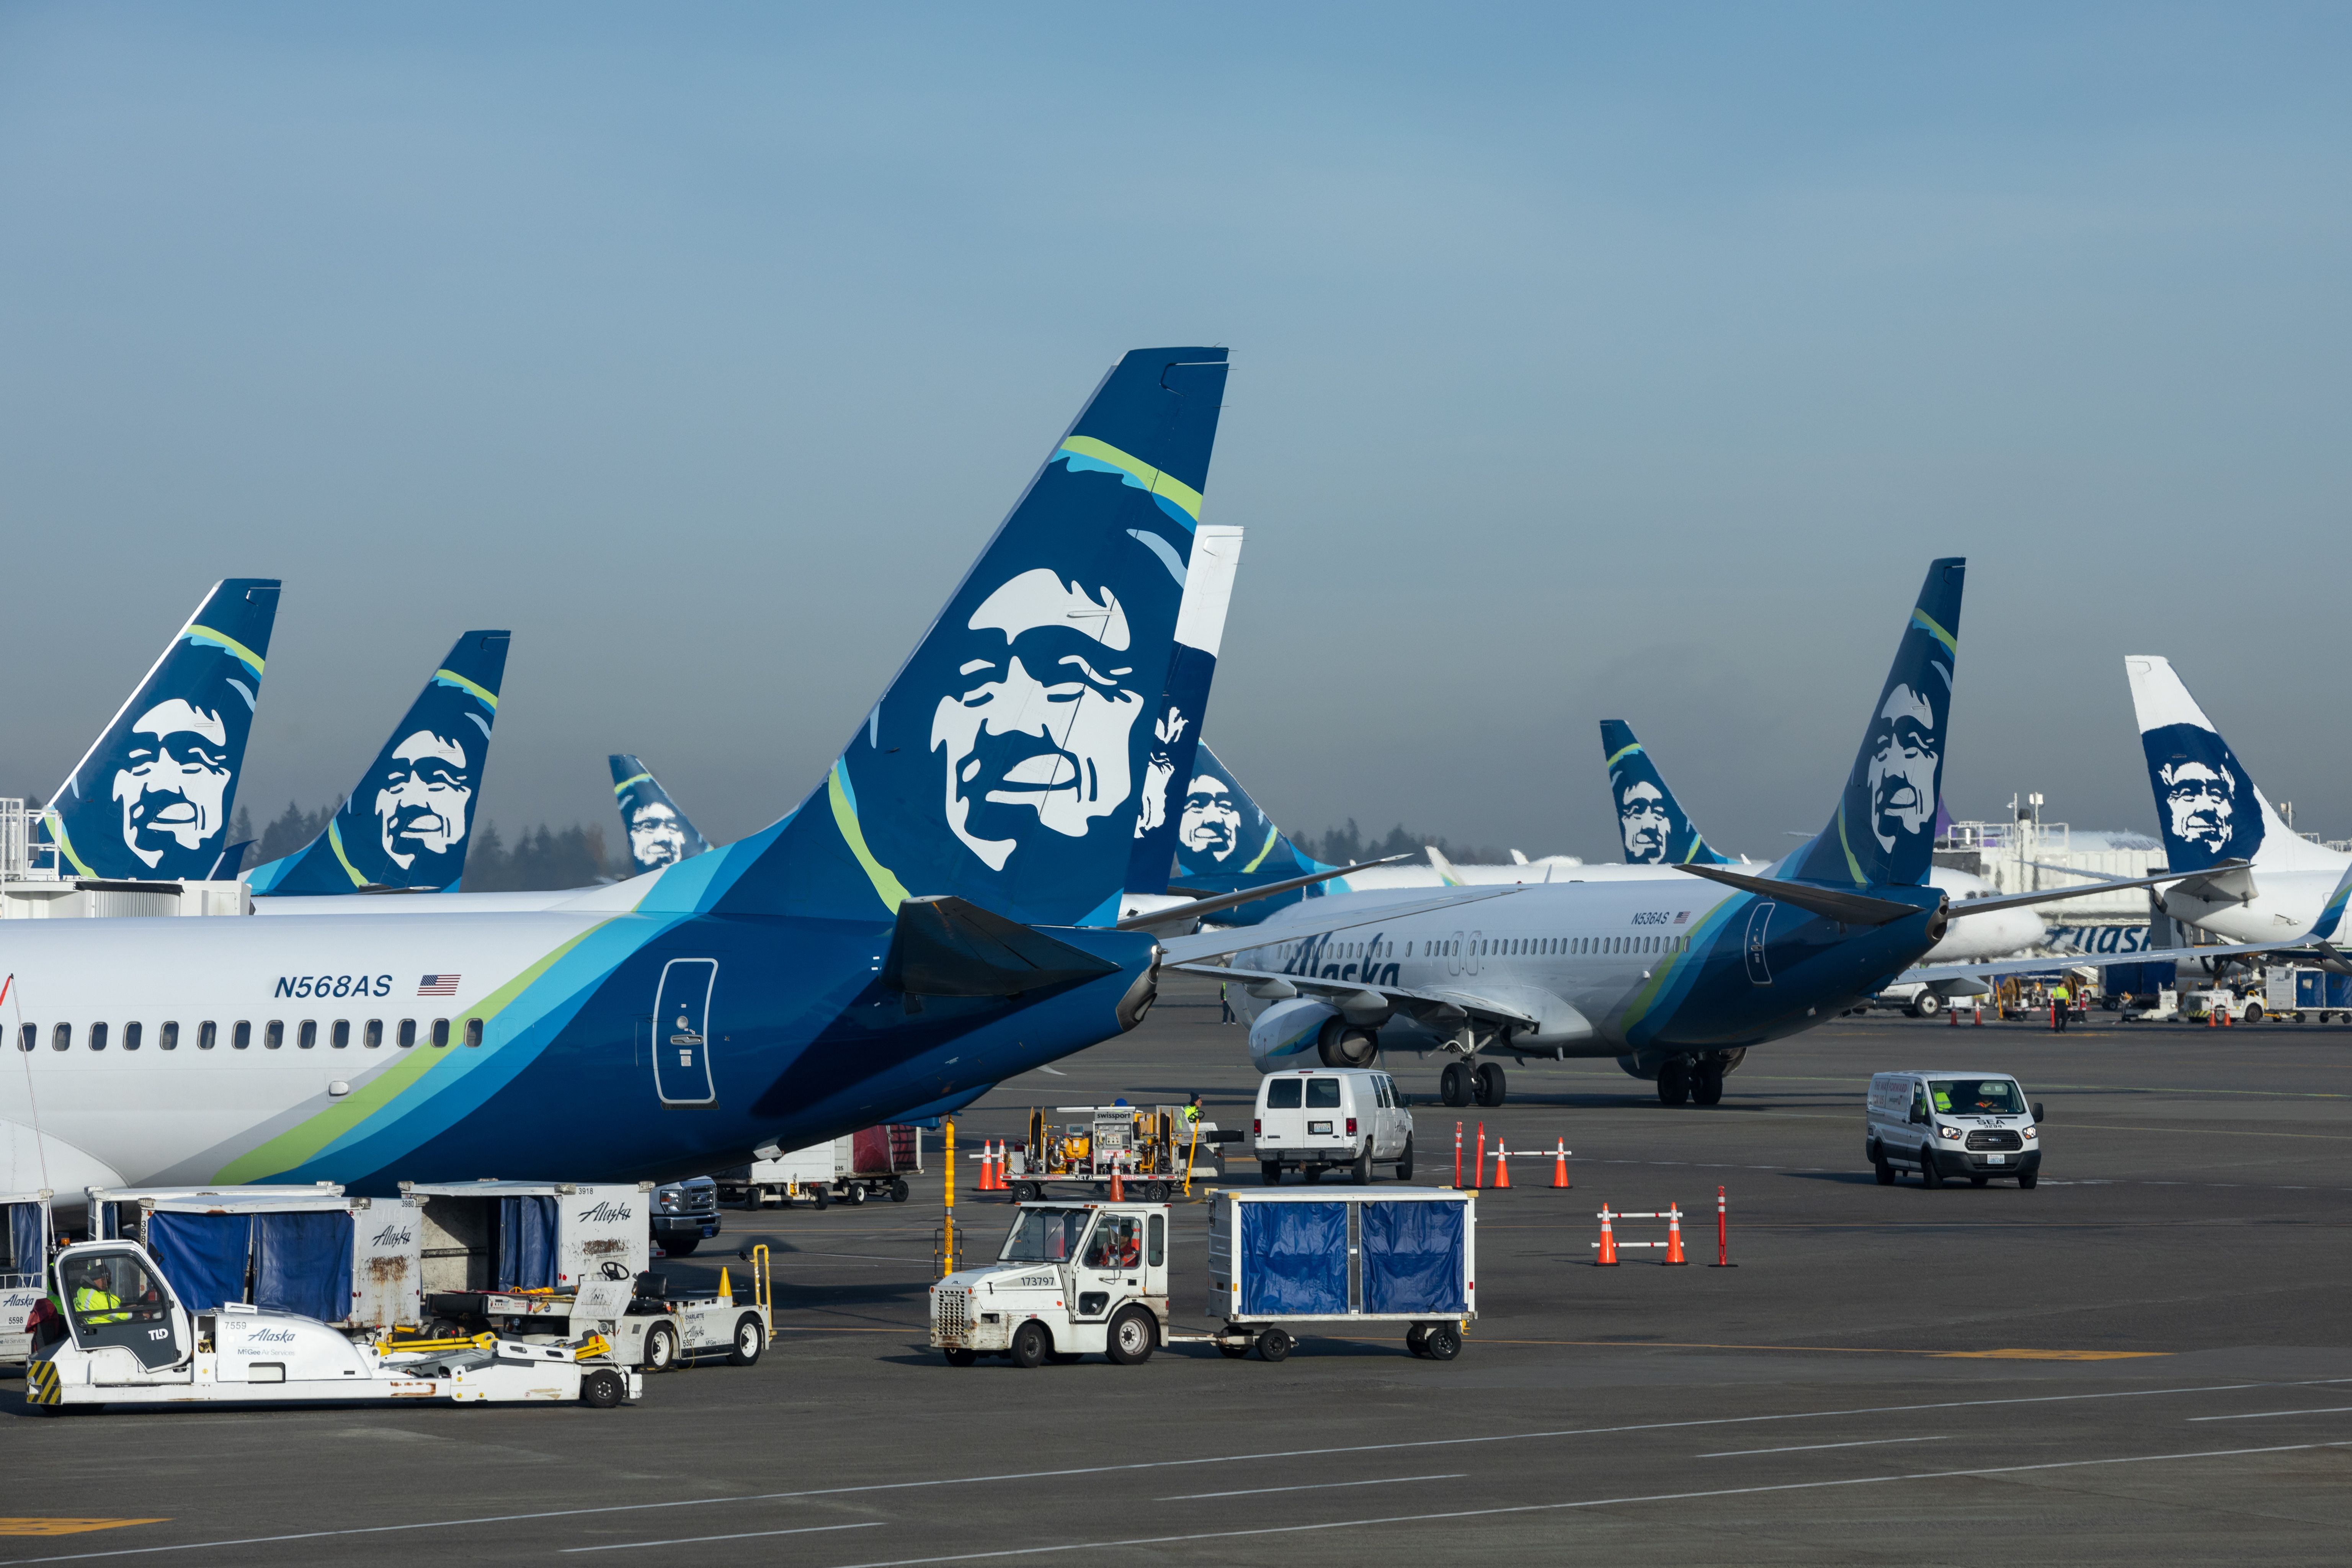 Several Alaska Airlines aircraft on the apron at Seattle Tacoma International Airport.